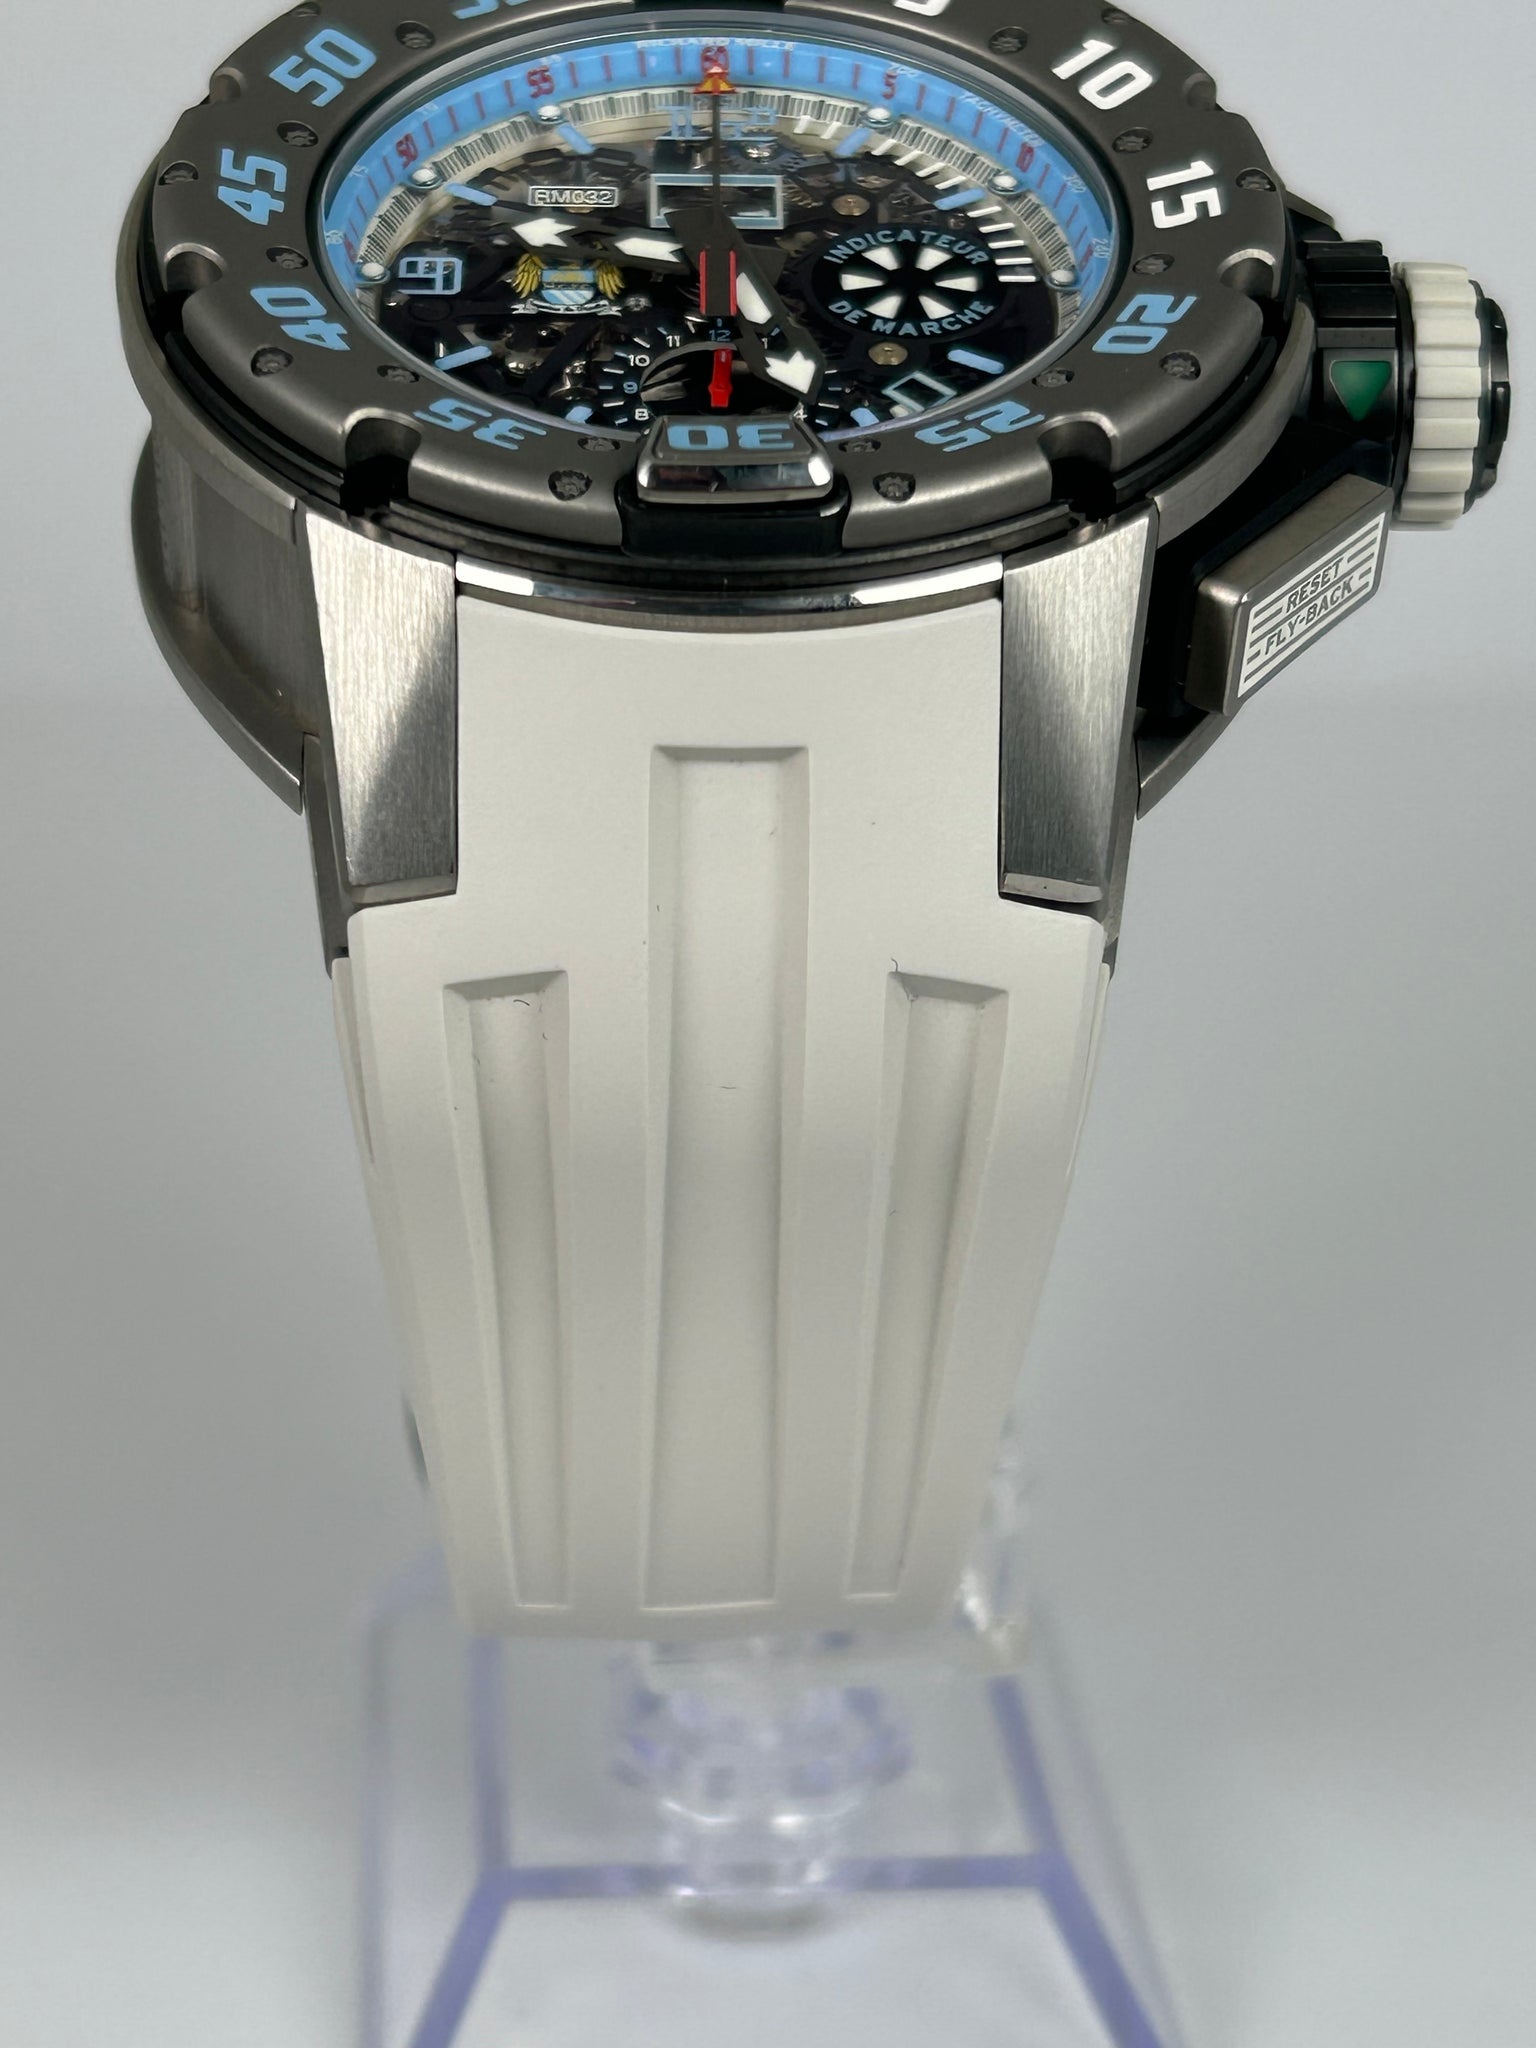 RICHARD MILLE RM032 MANCHESTER CITY LIMITED